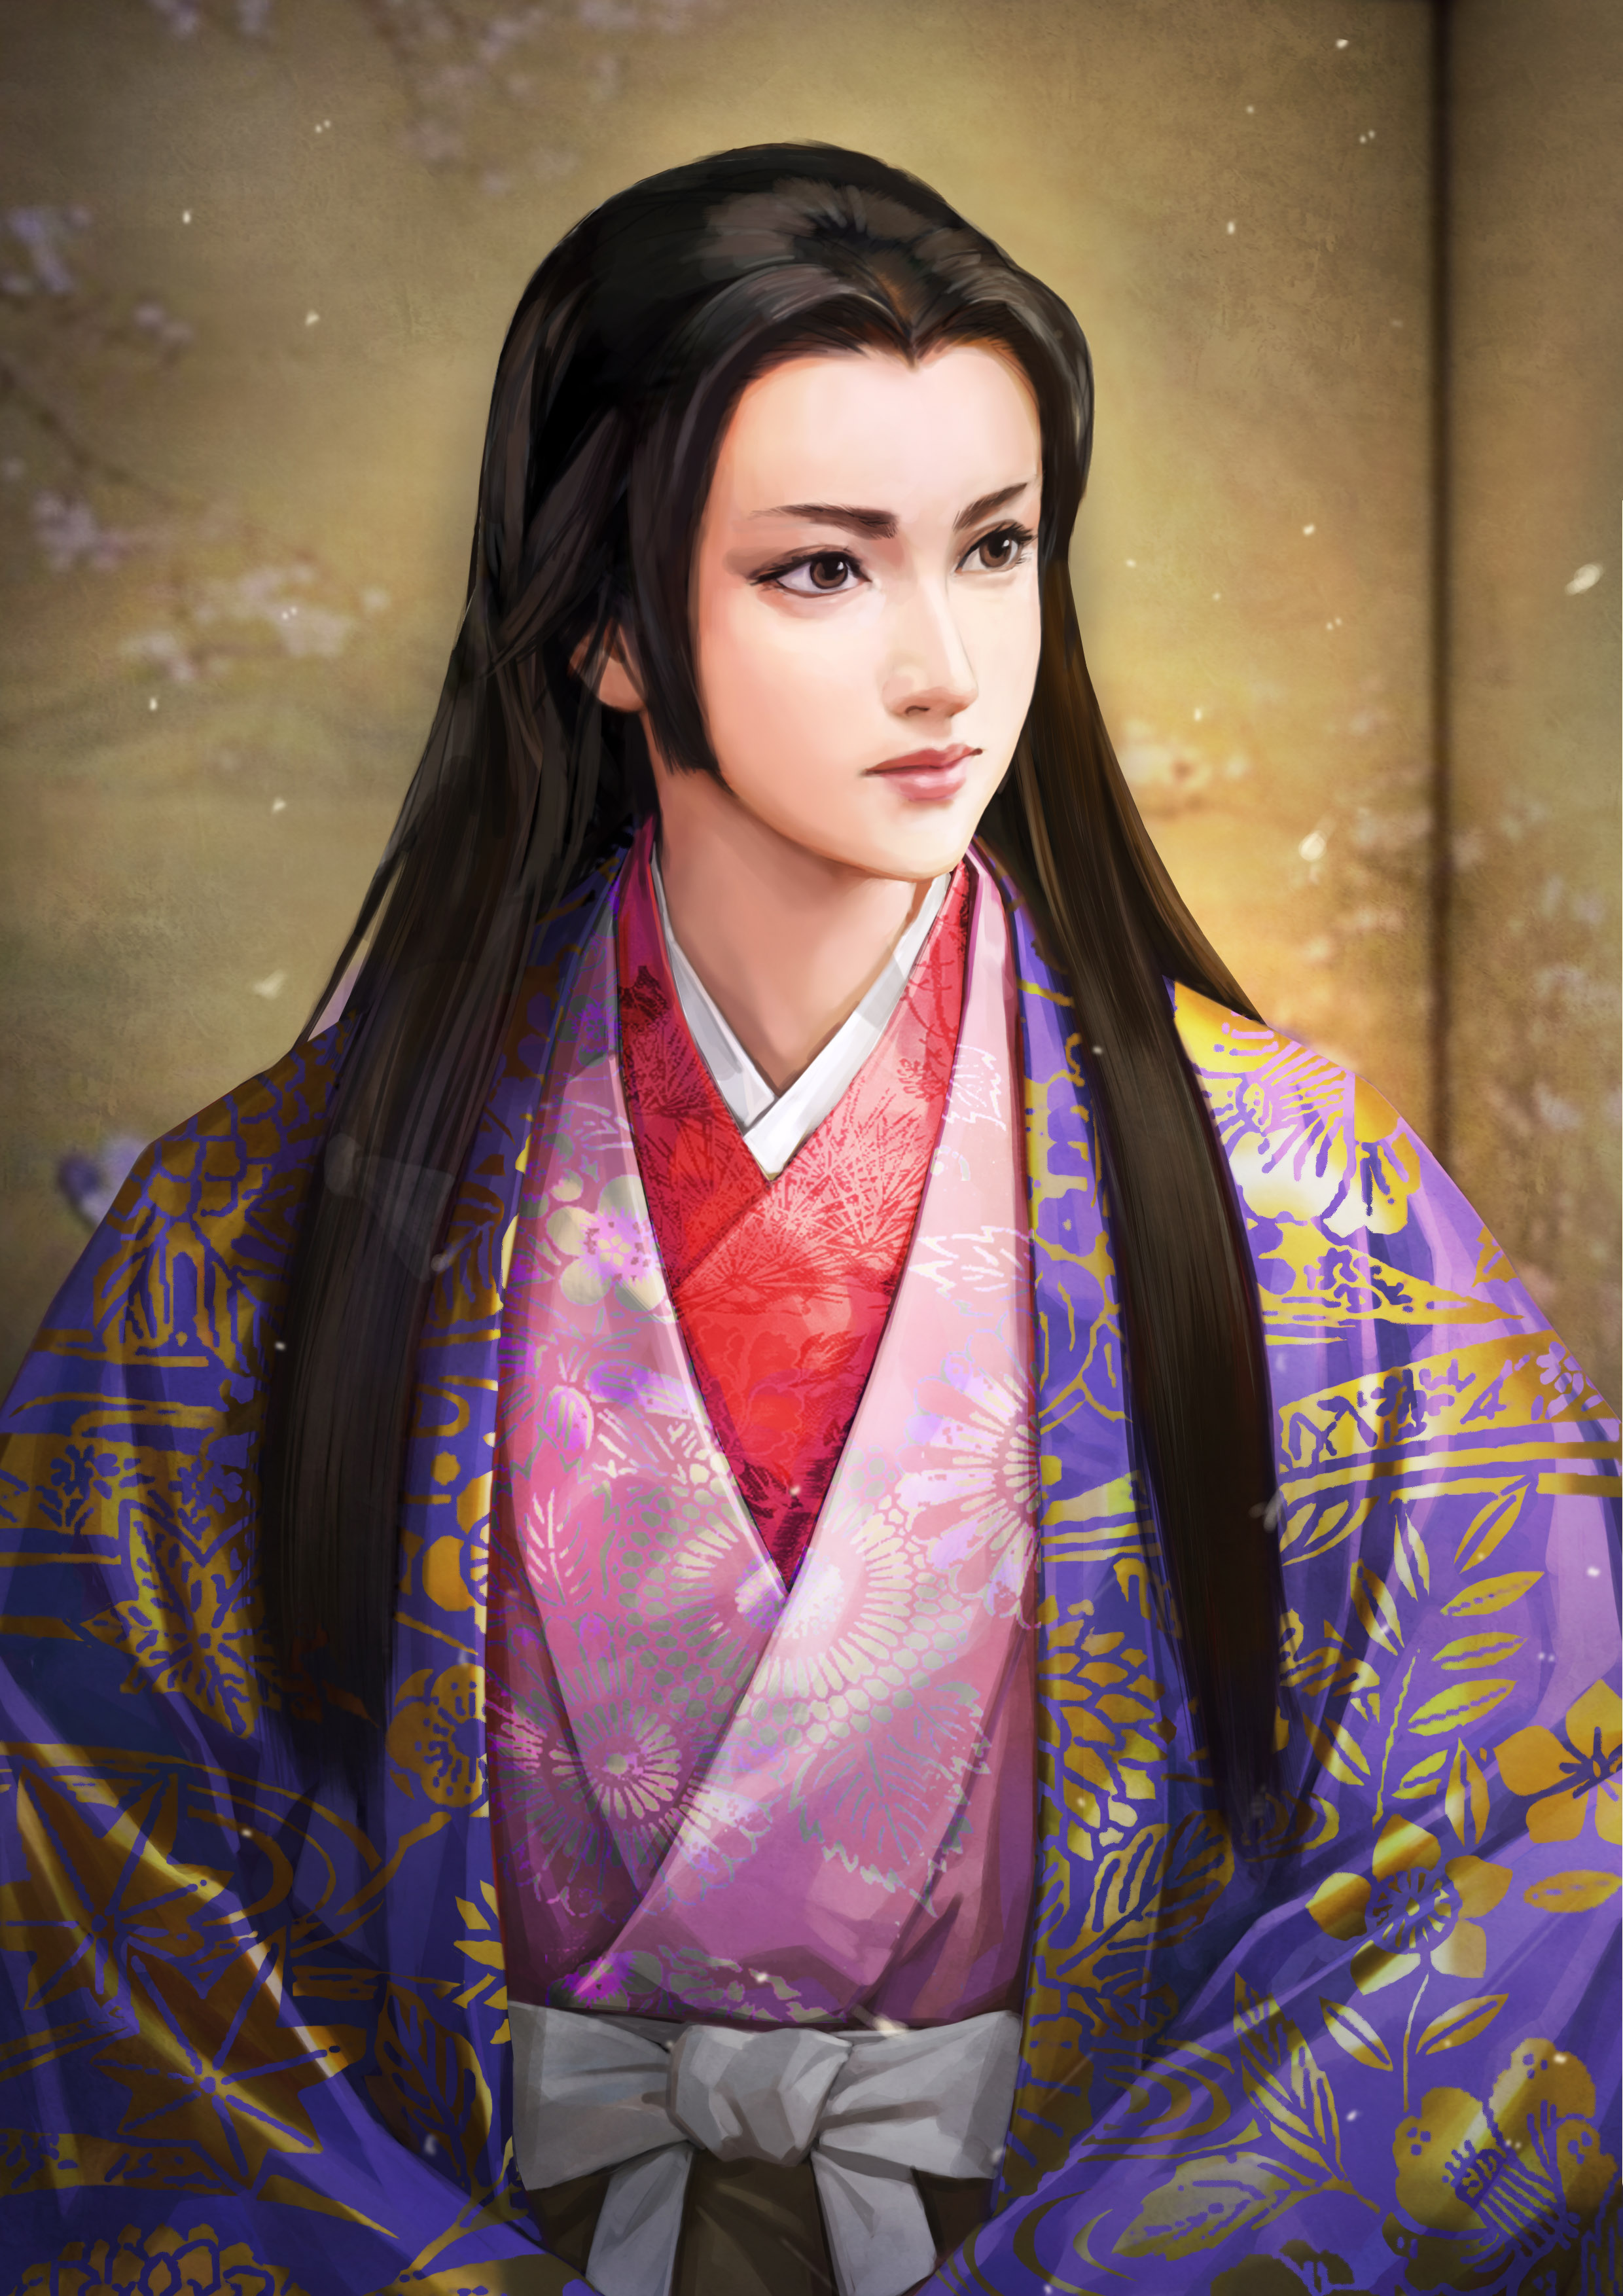 nobunagas-ambition-sphere-of-influence-character-portrait- (16 ...